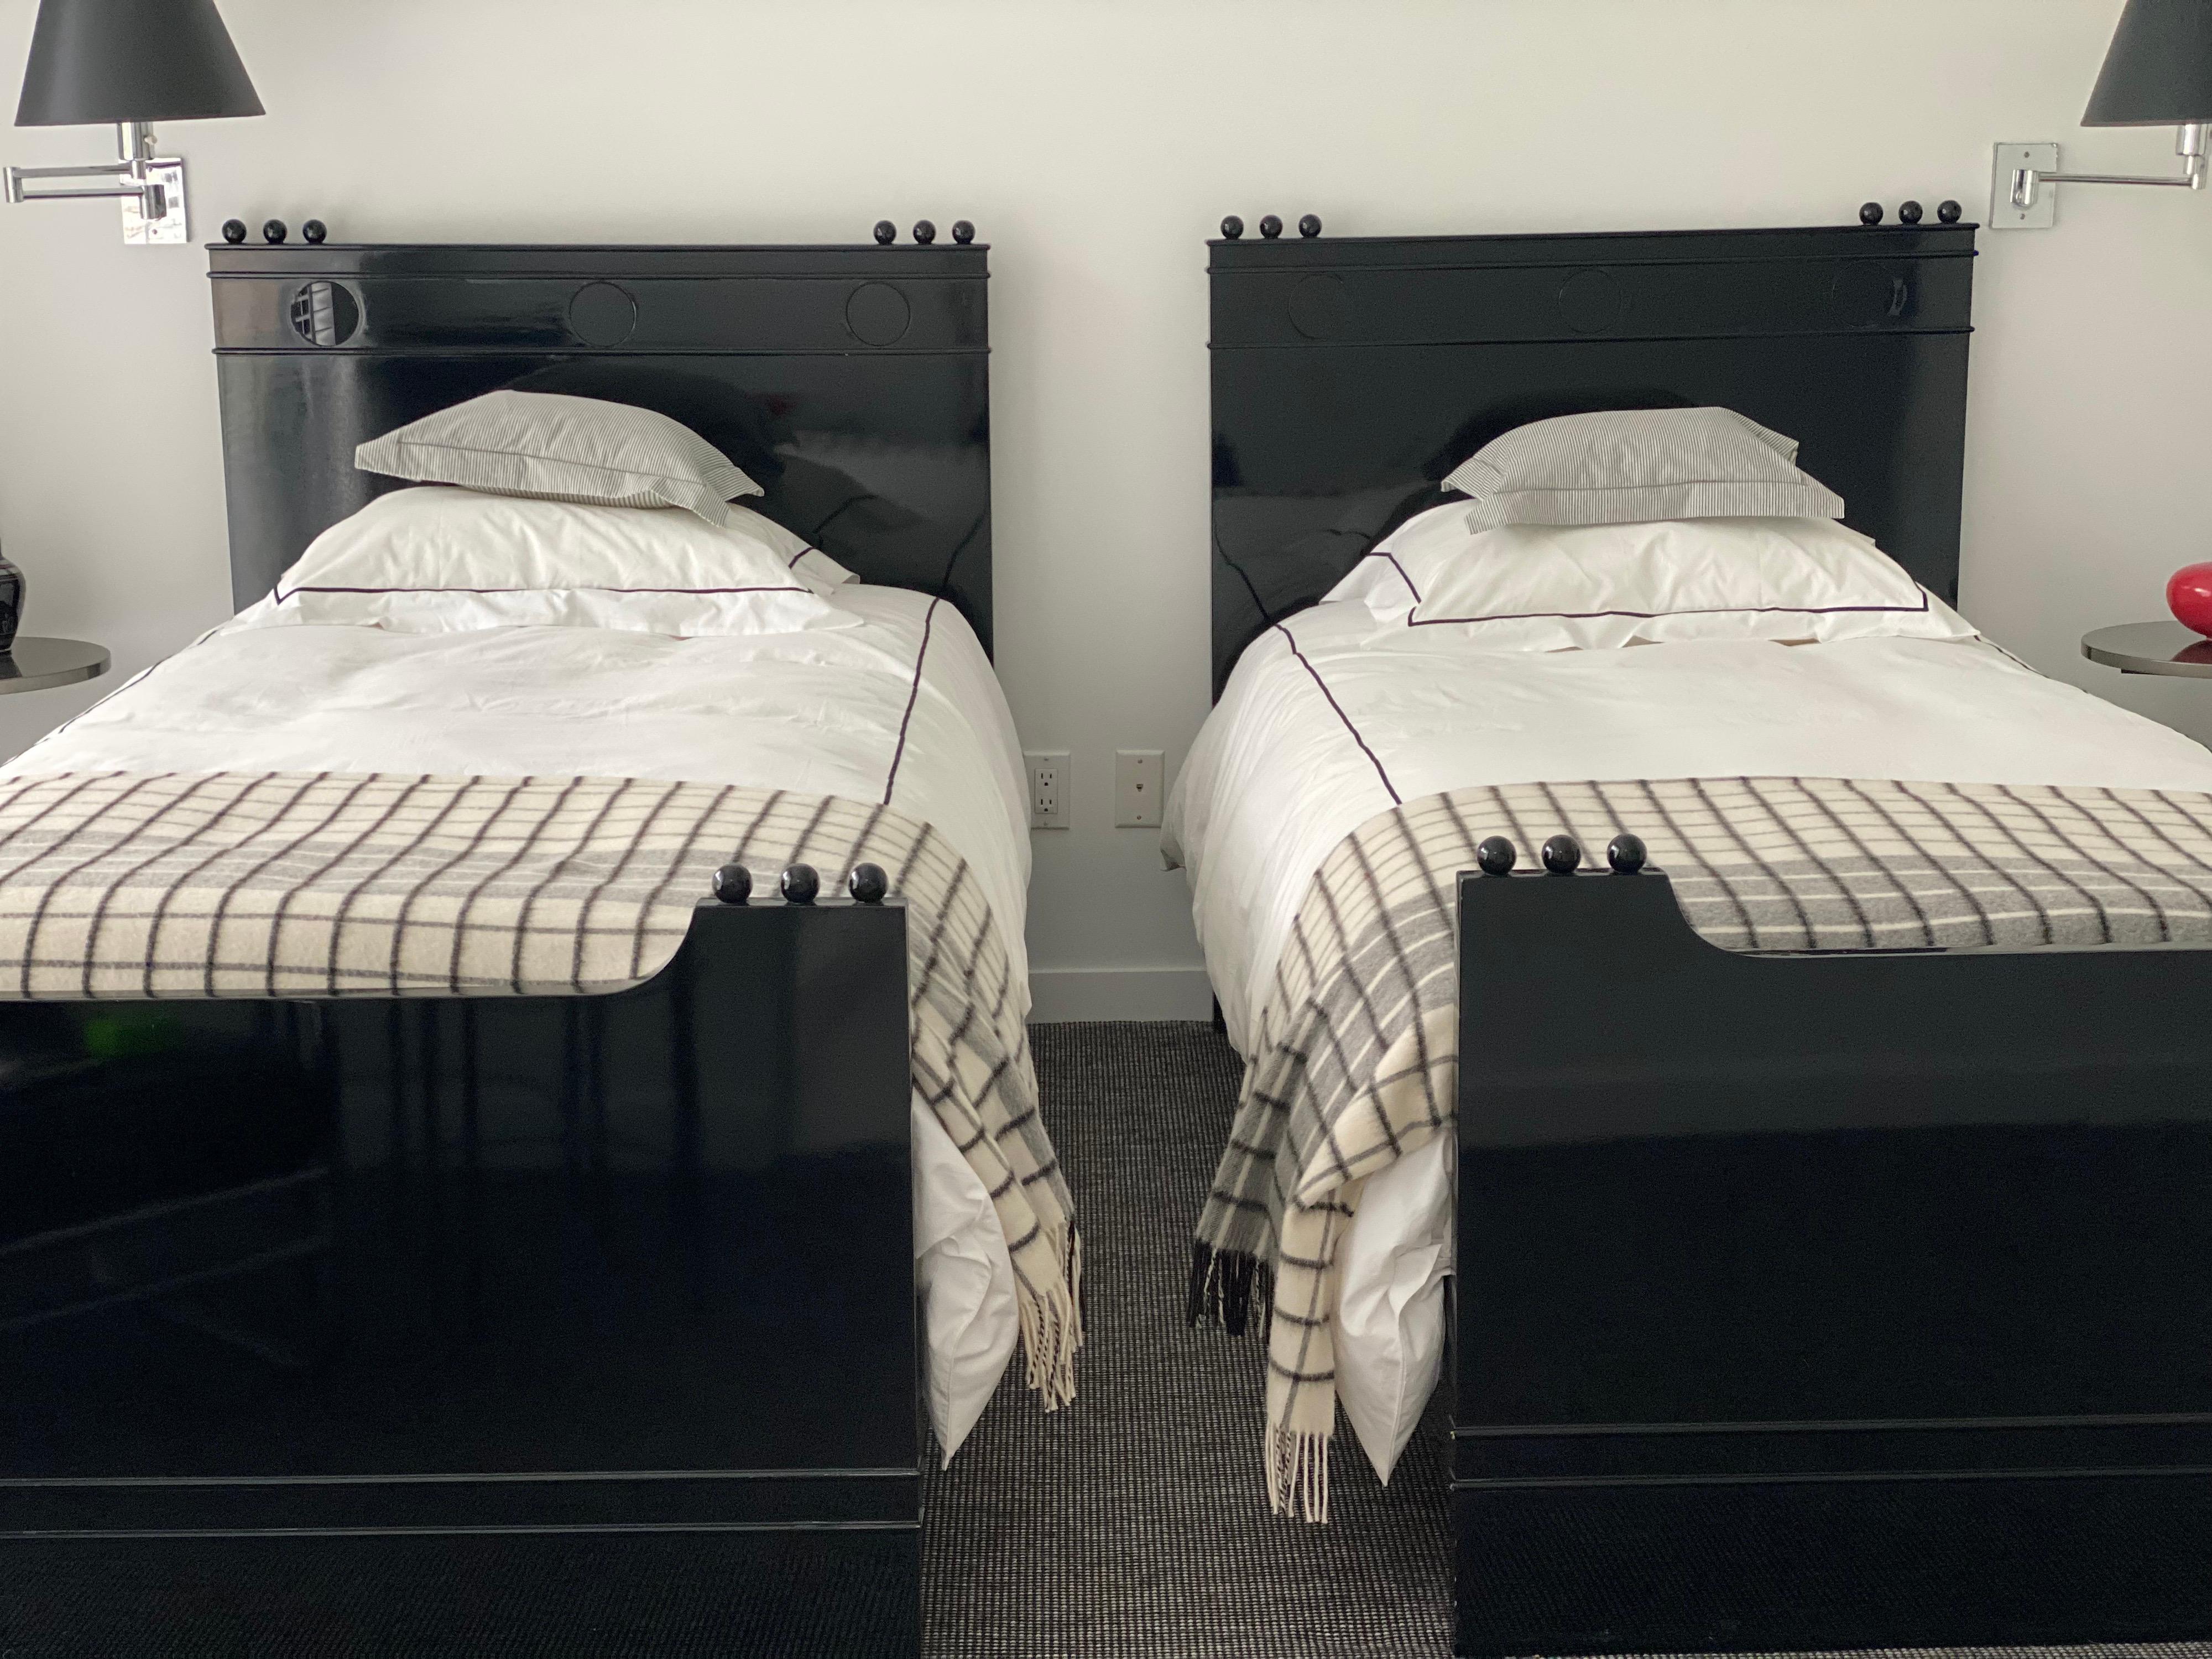 Beautiful pair of black lacquered Art Deco twin lady and gentleman bed frames.
Featuring one slightly longer bed, by 1.75